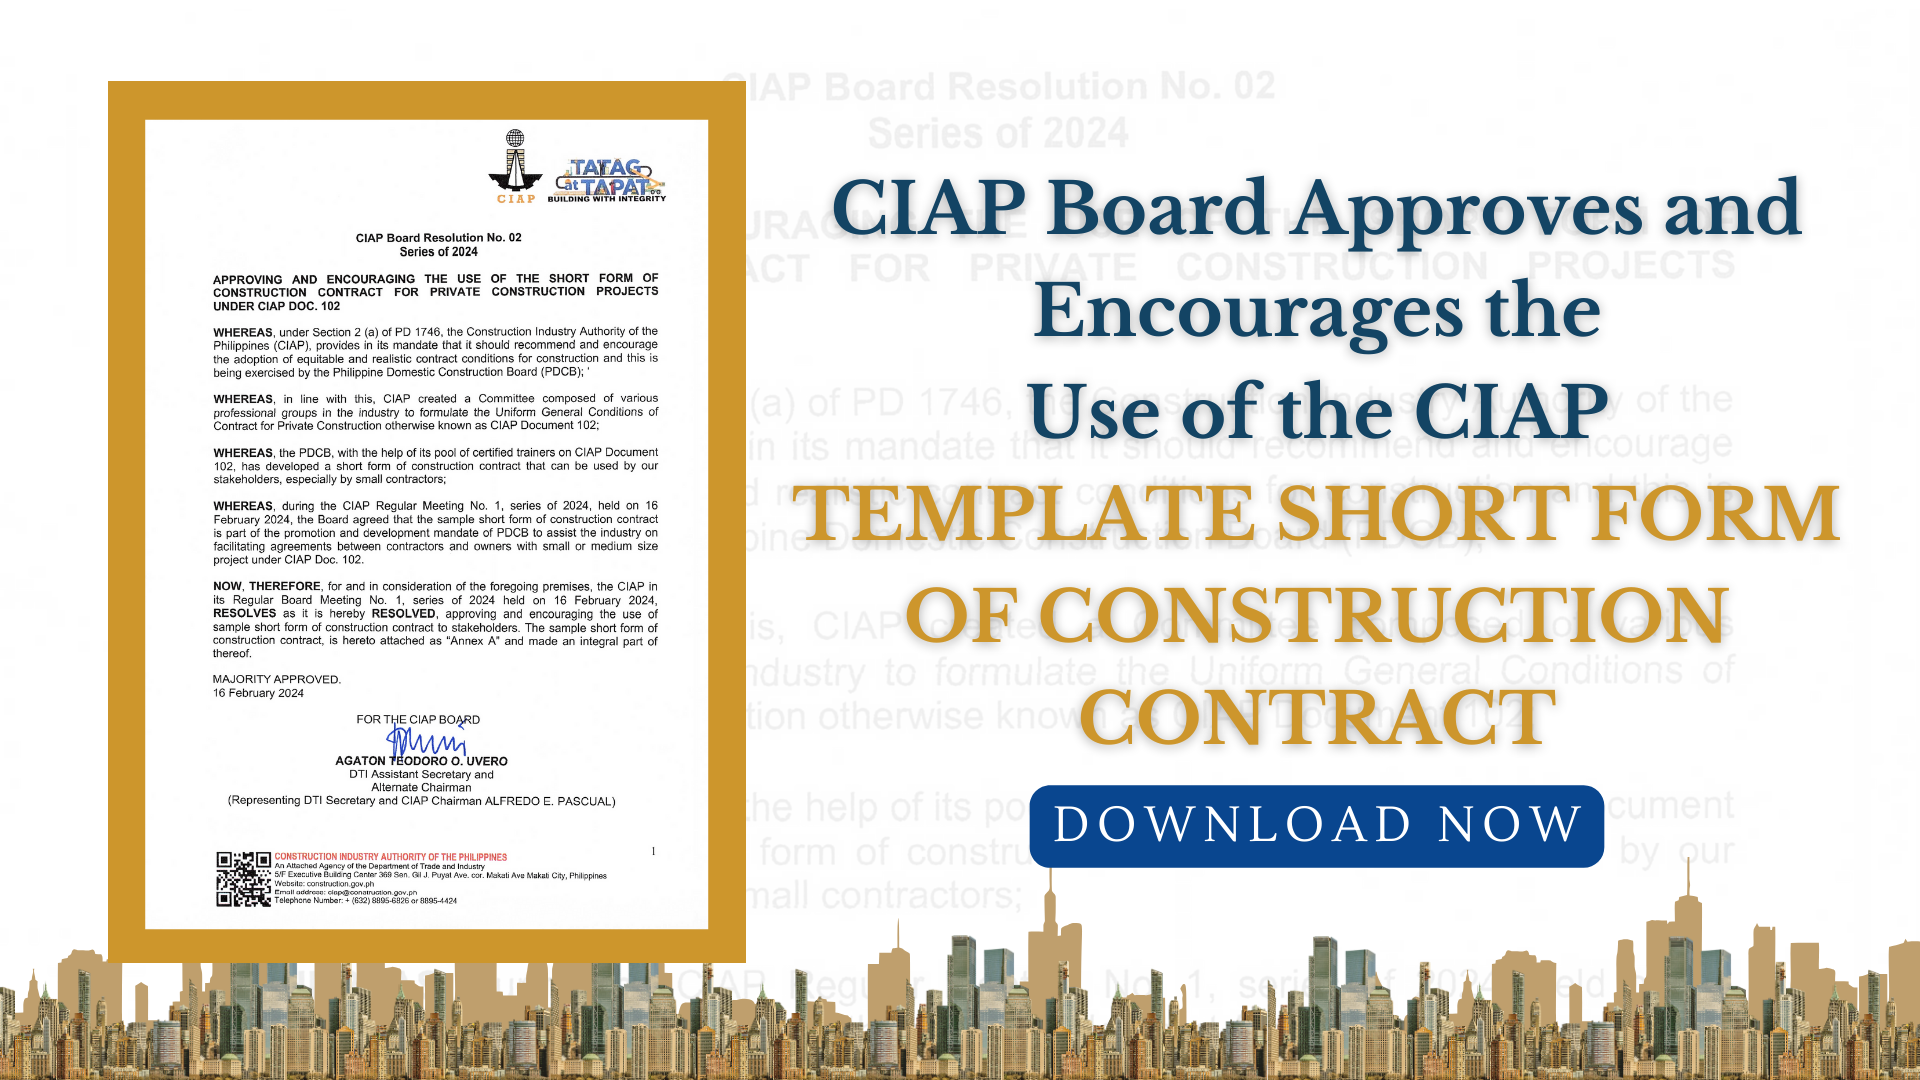 CIAP approves and encourages the Use of the CIAP Template Short Form of Construction Contract